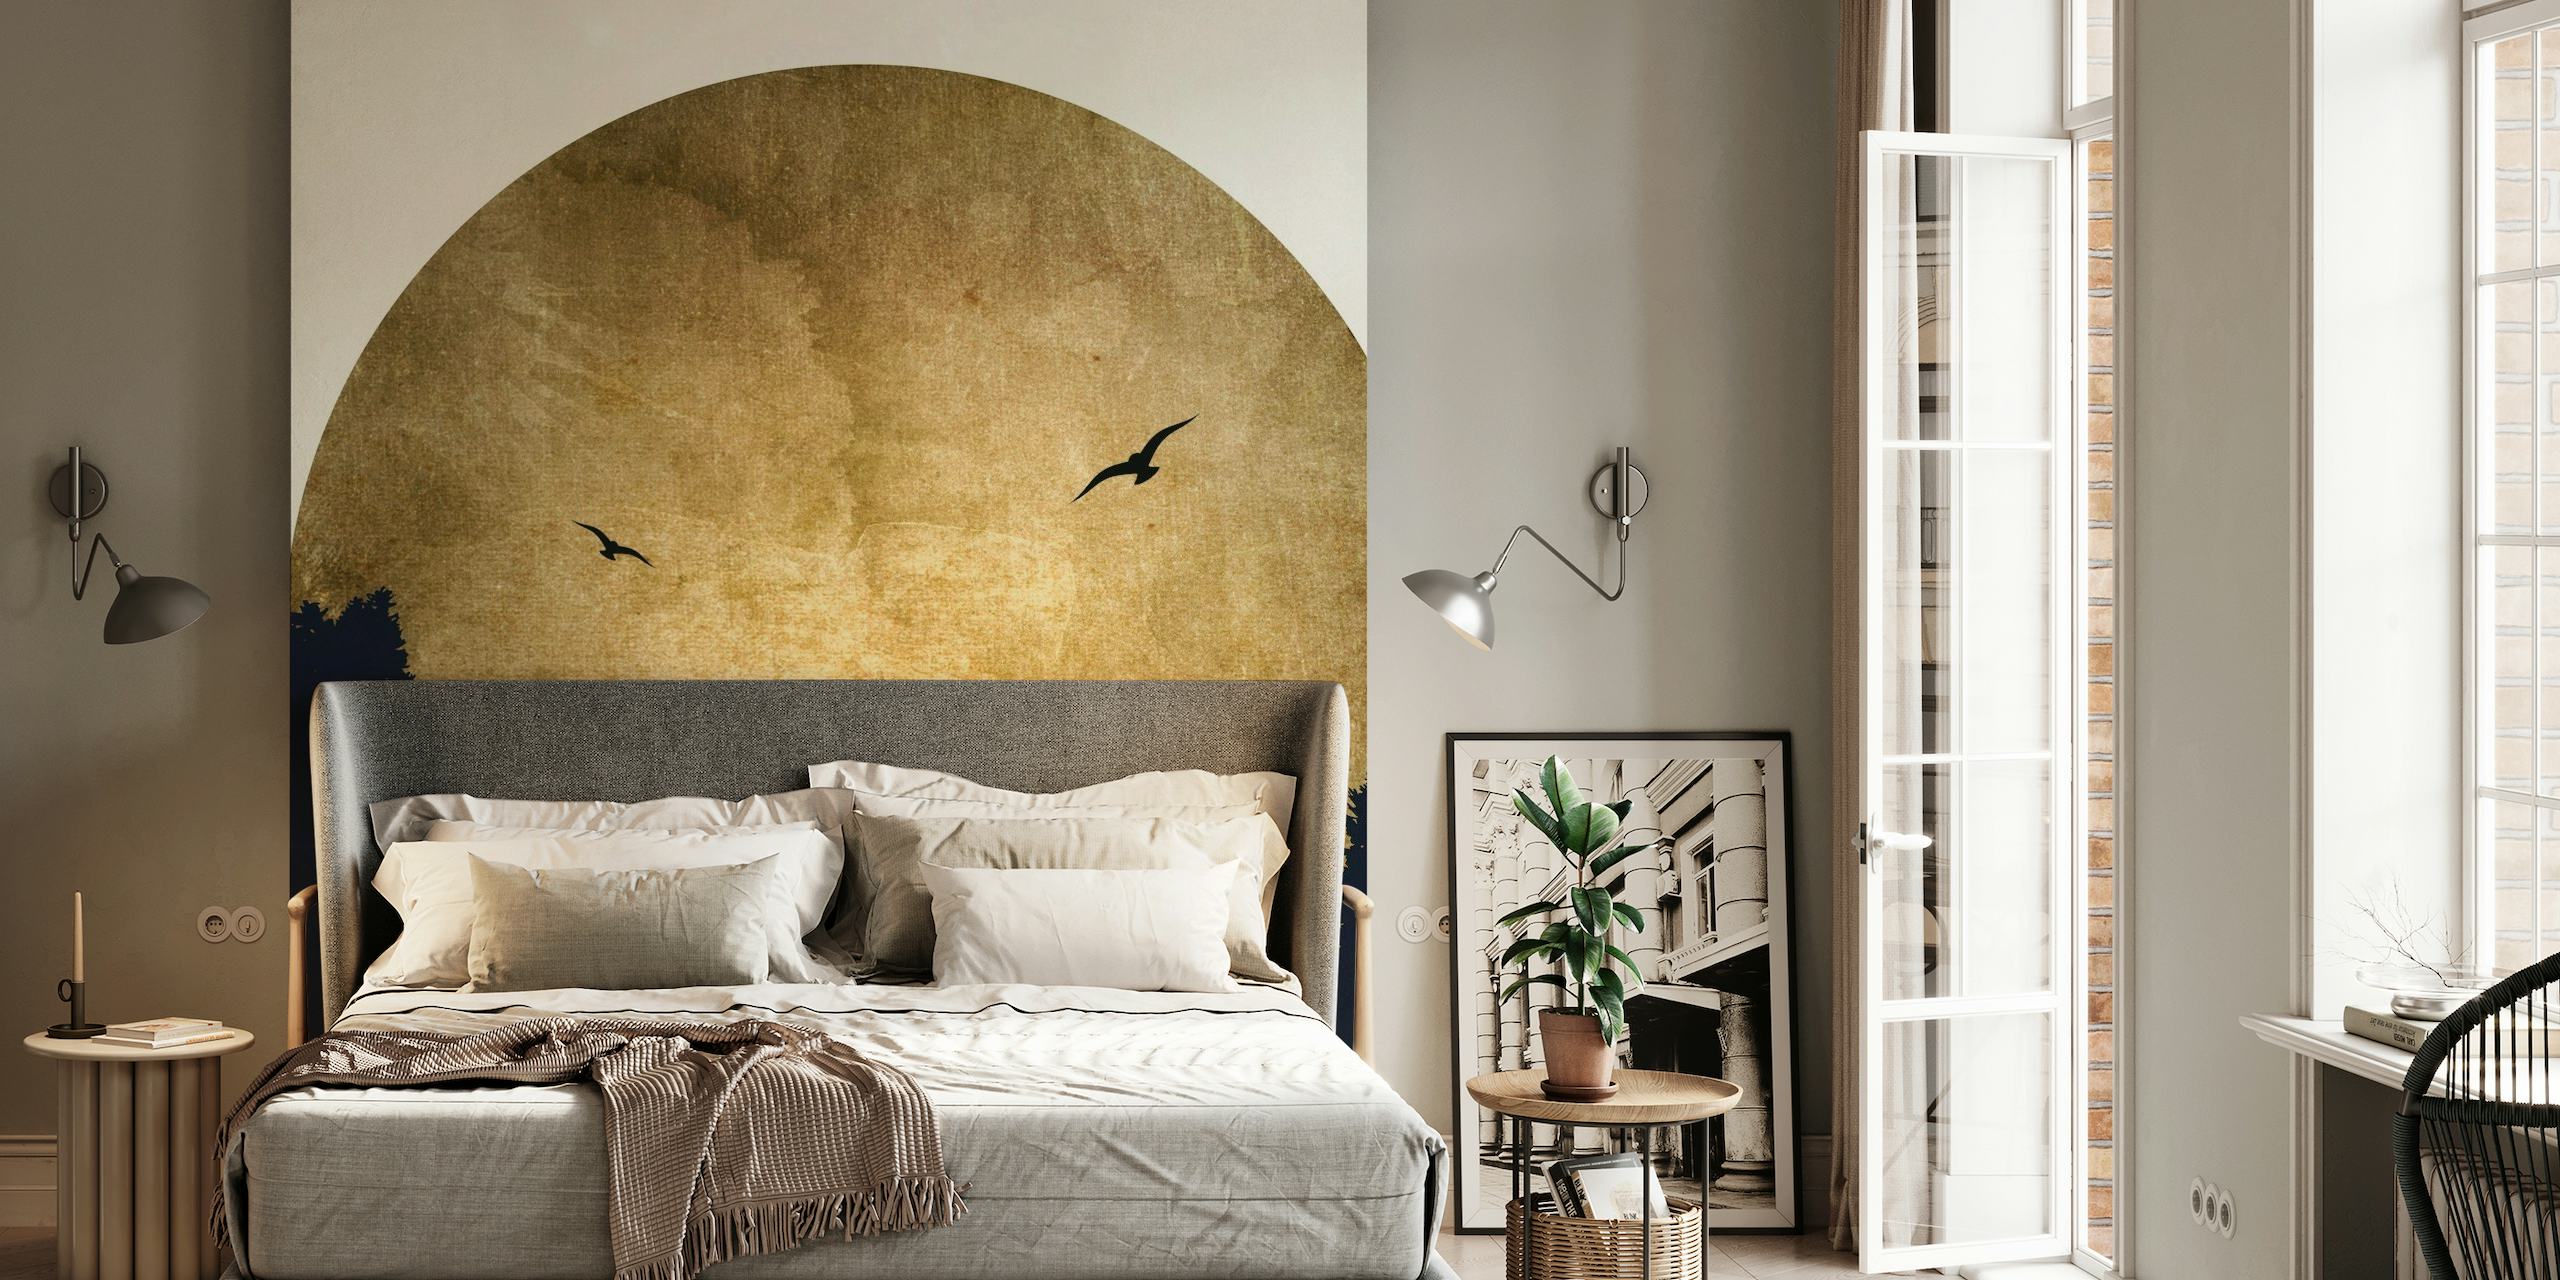 Sepia-toned sunrise wall mural with birds in silhouette